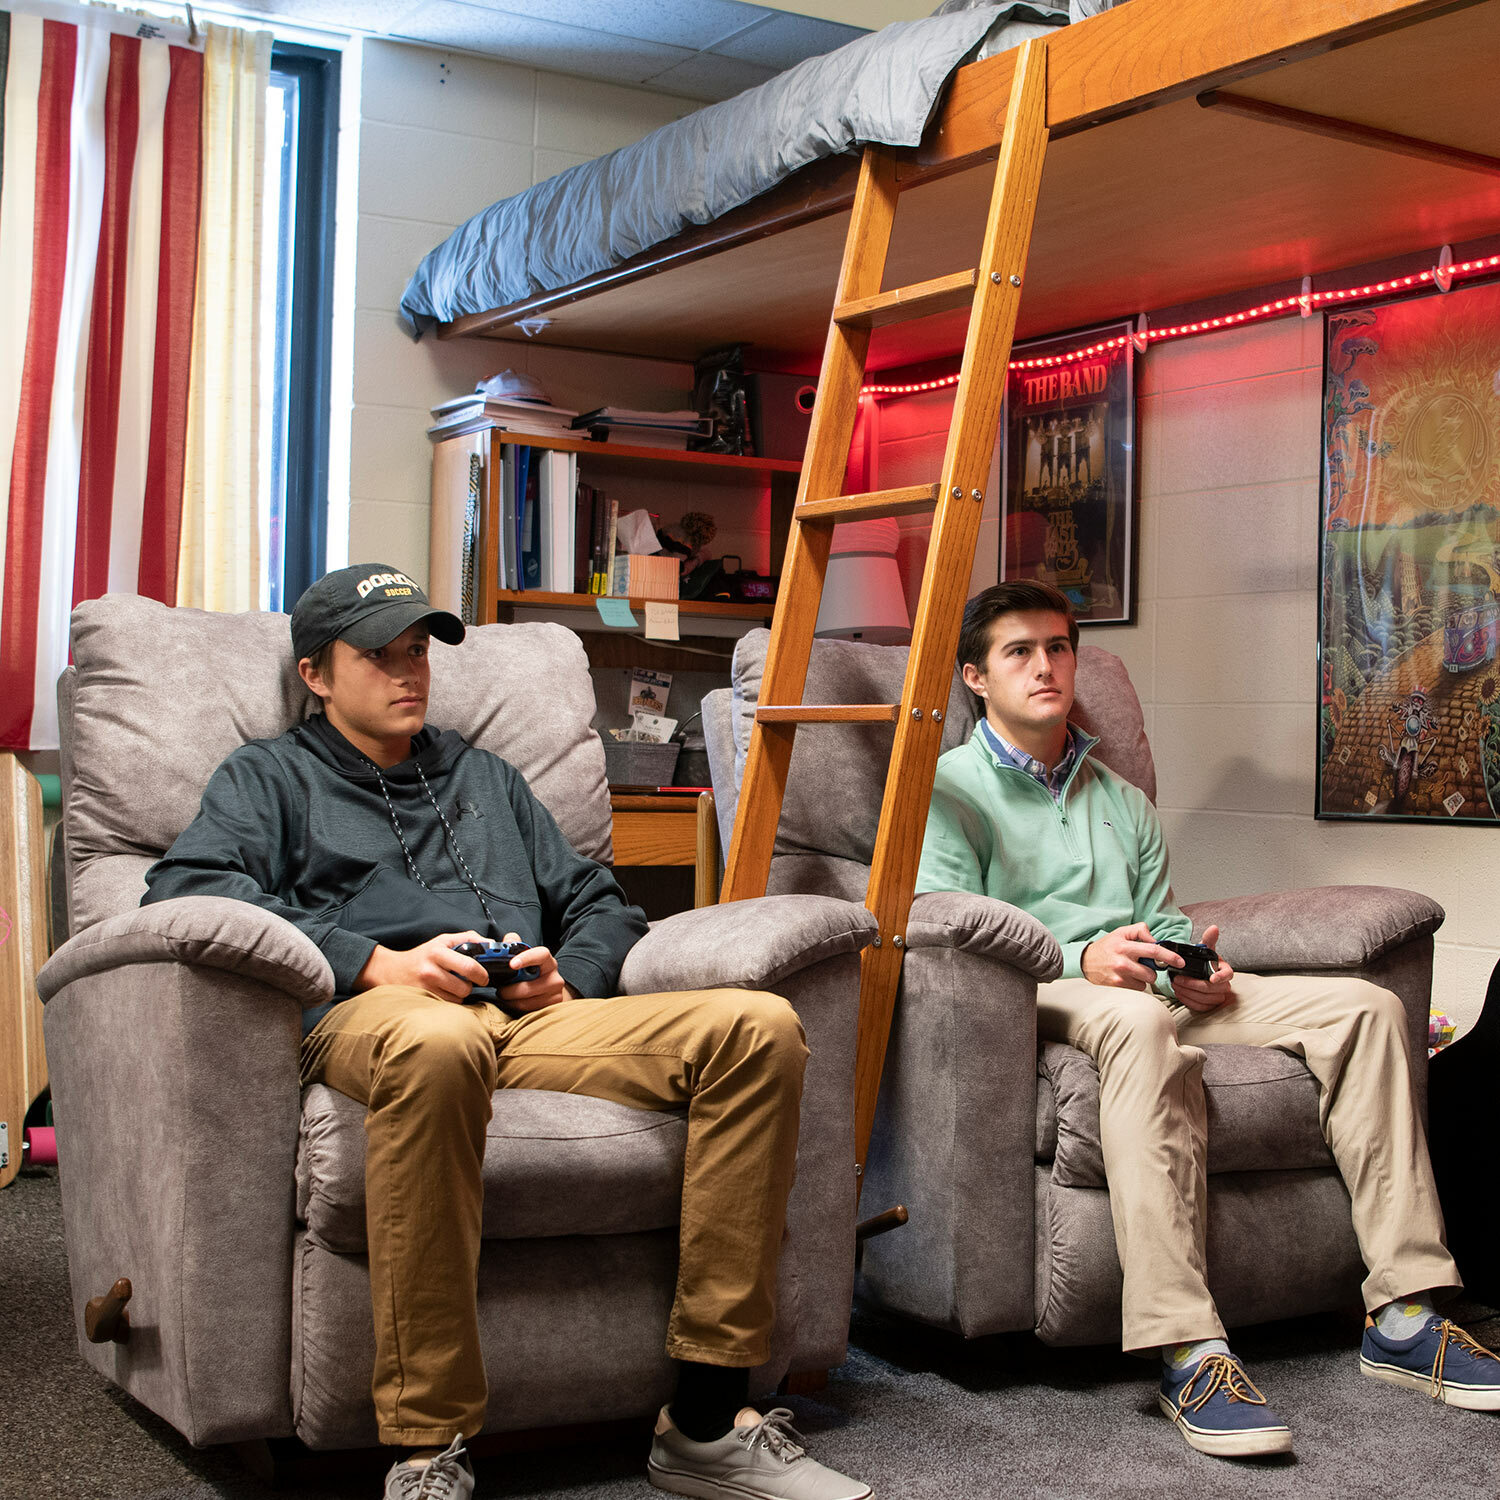 Two young men sit in recliners in dorm room with video game controllers in hand